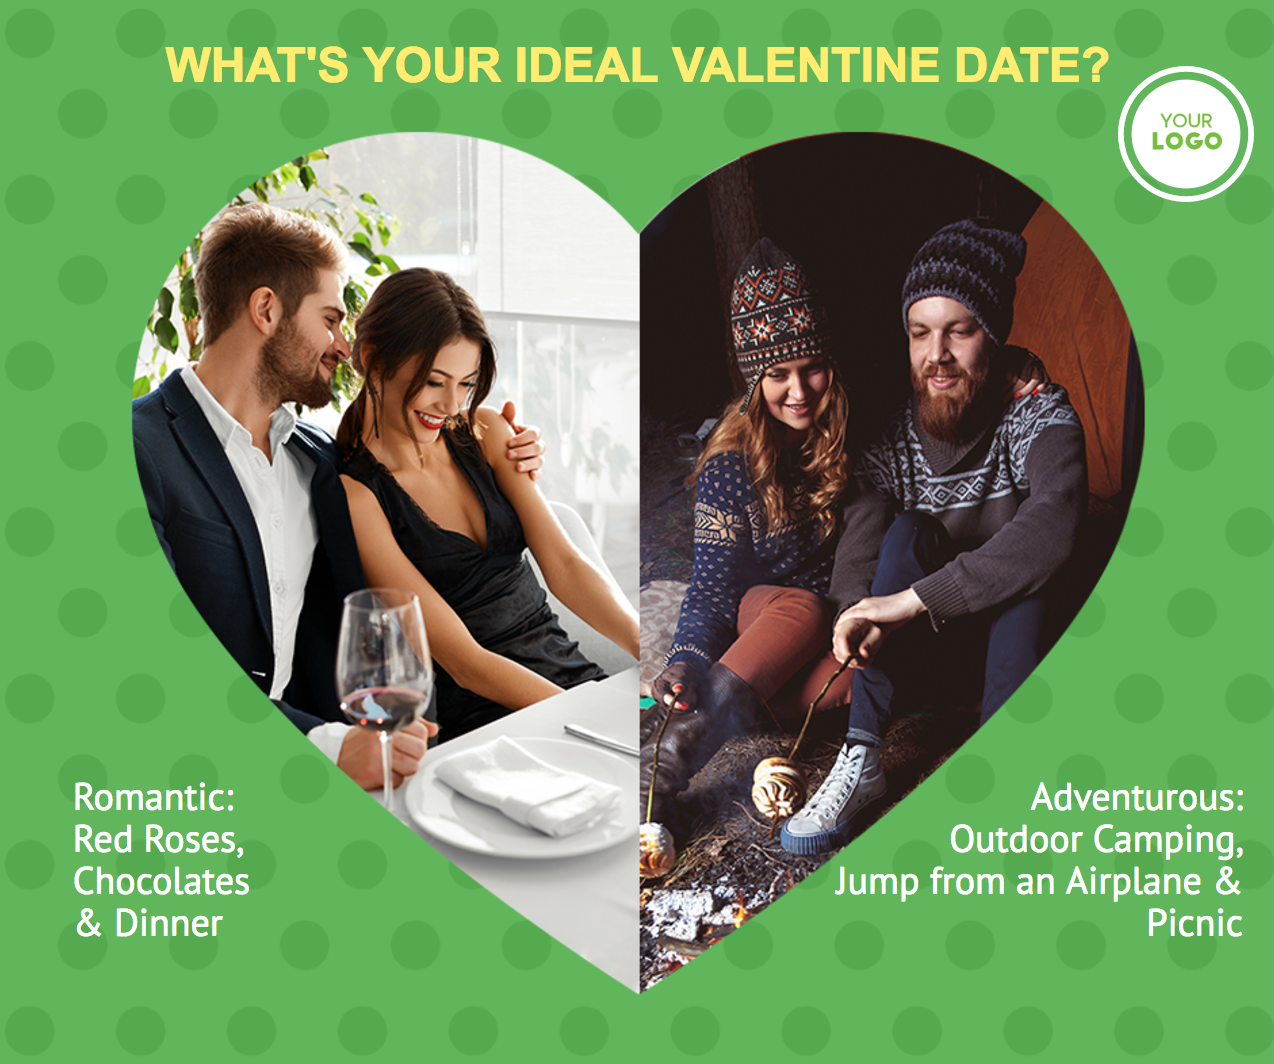 what's your ideal valentine date, quizz